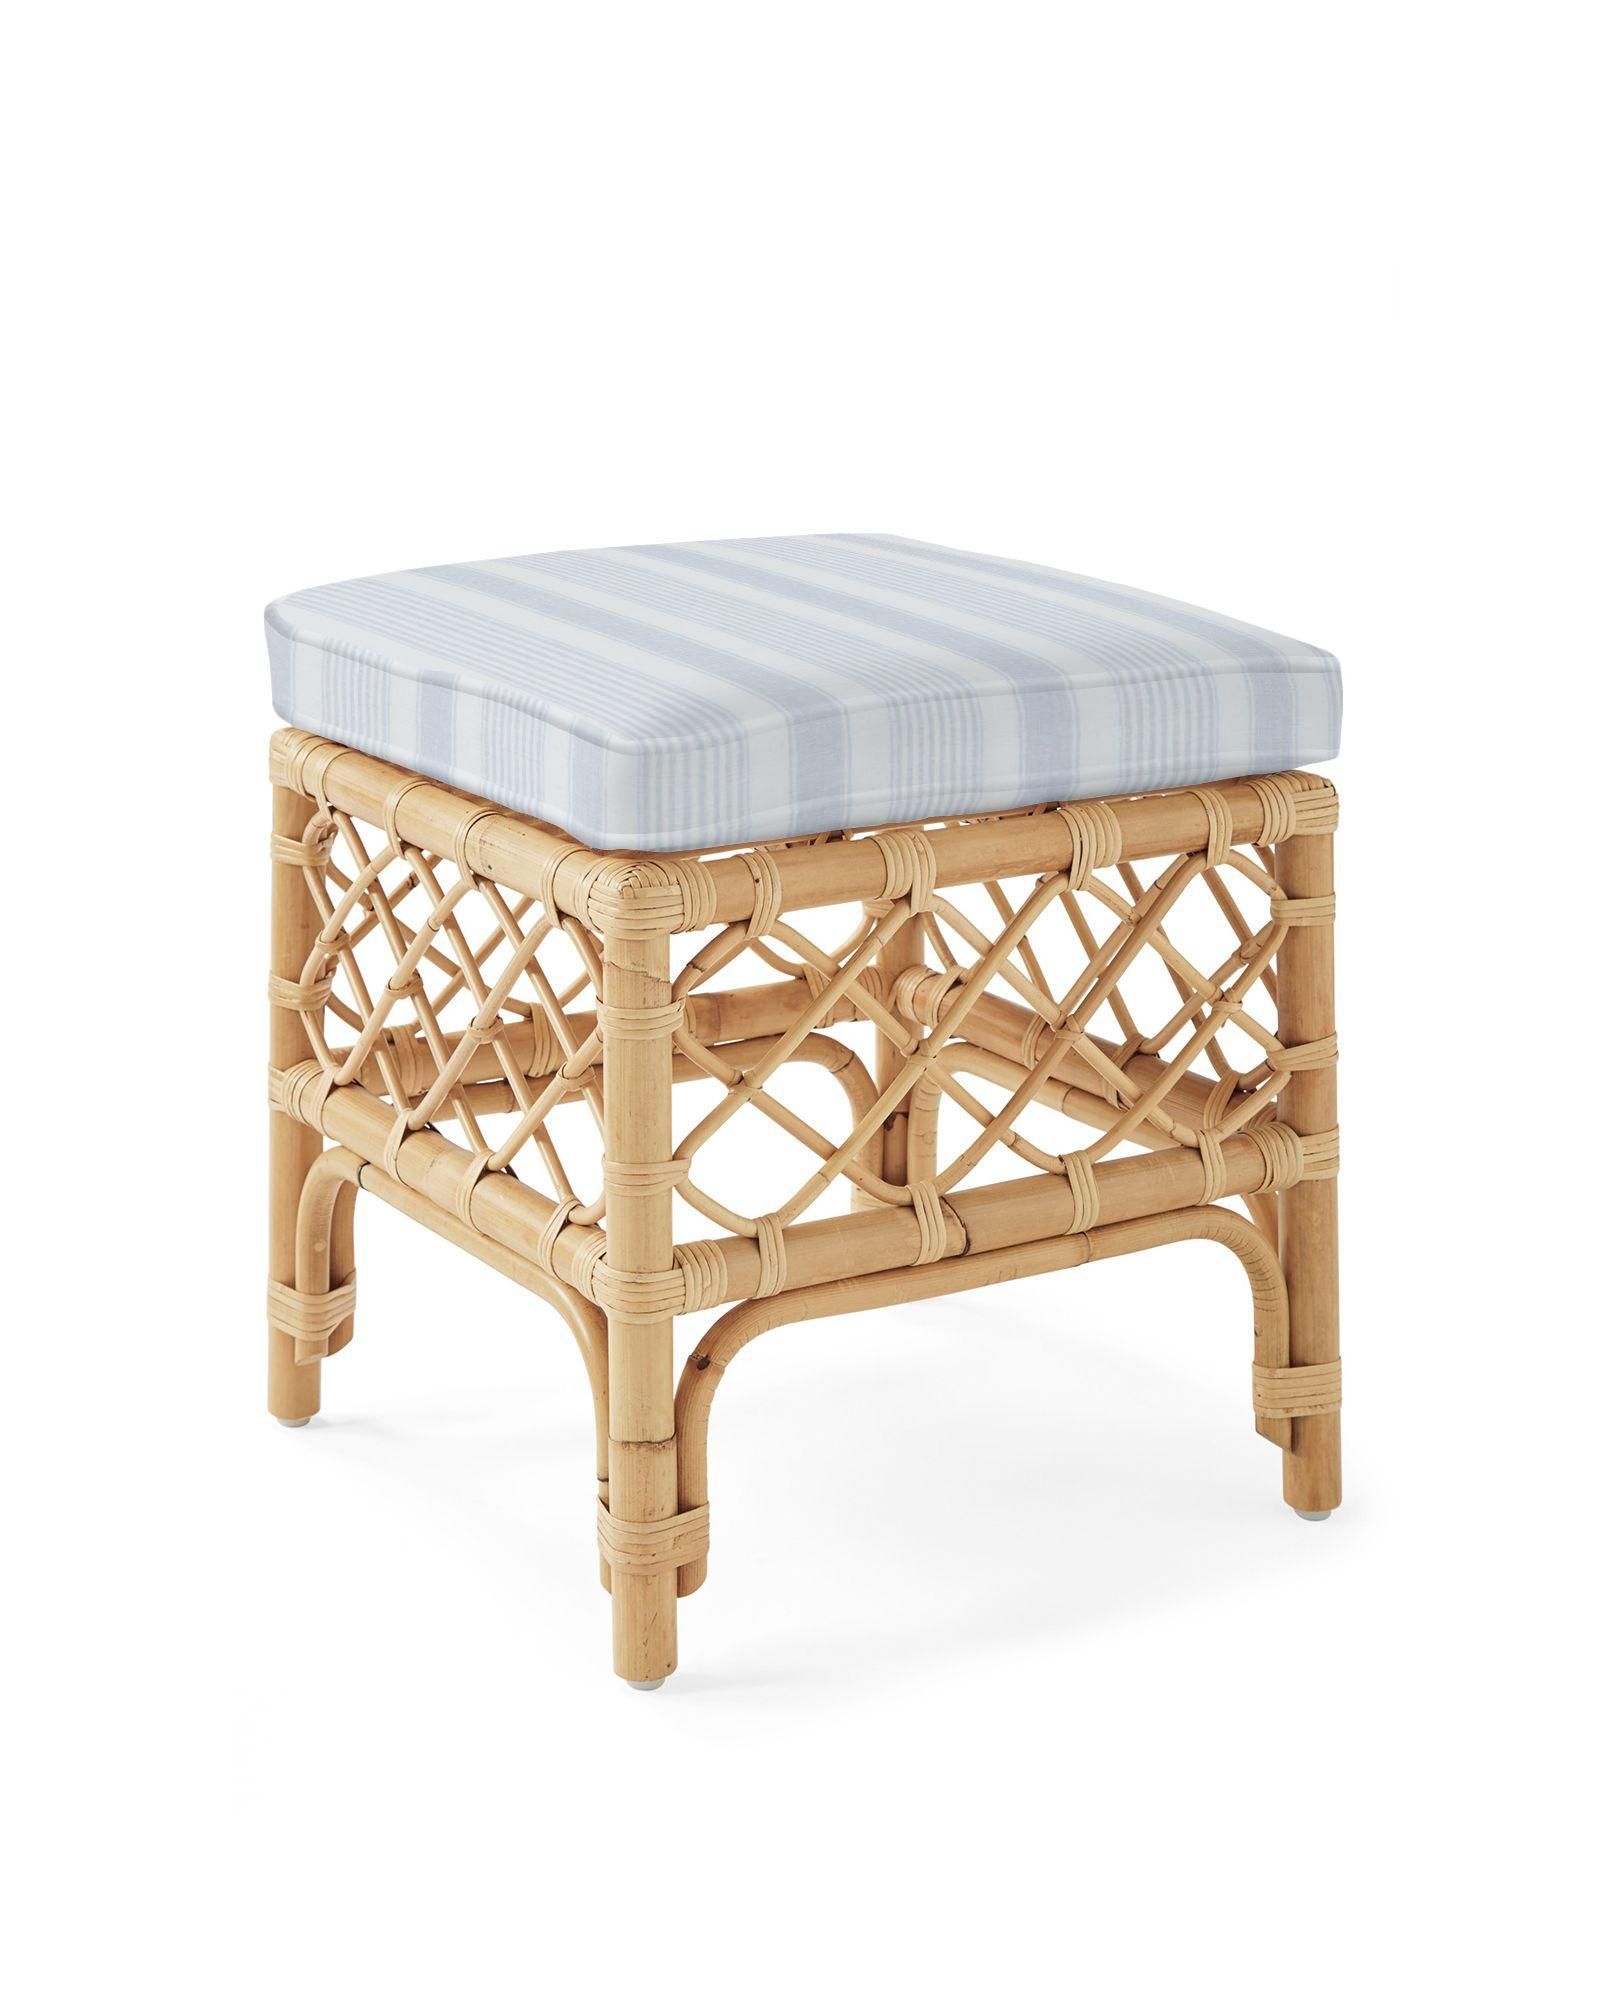 Avalon Rattan Stool - Natural | Serena and Lily